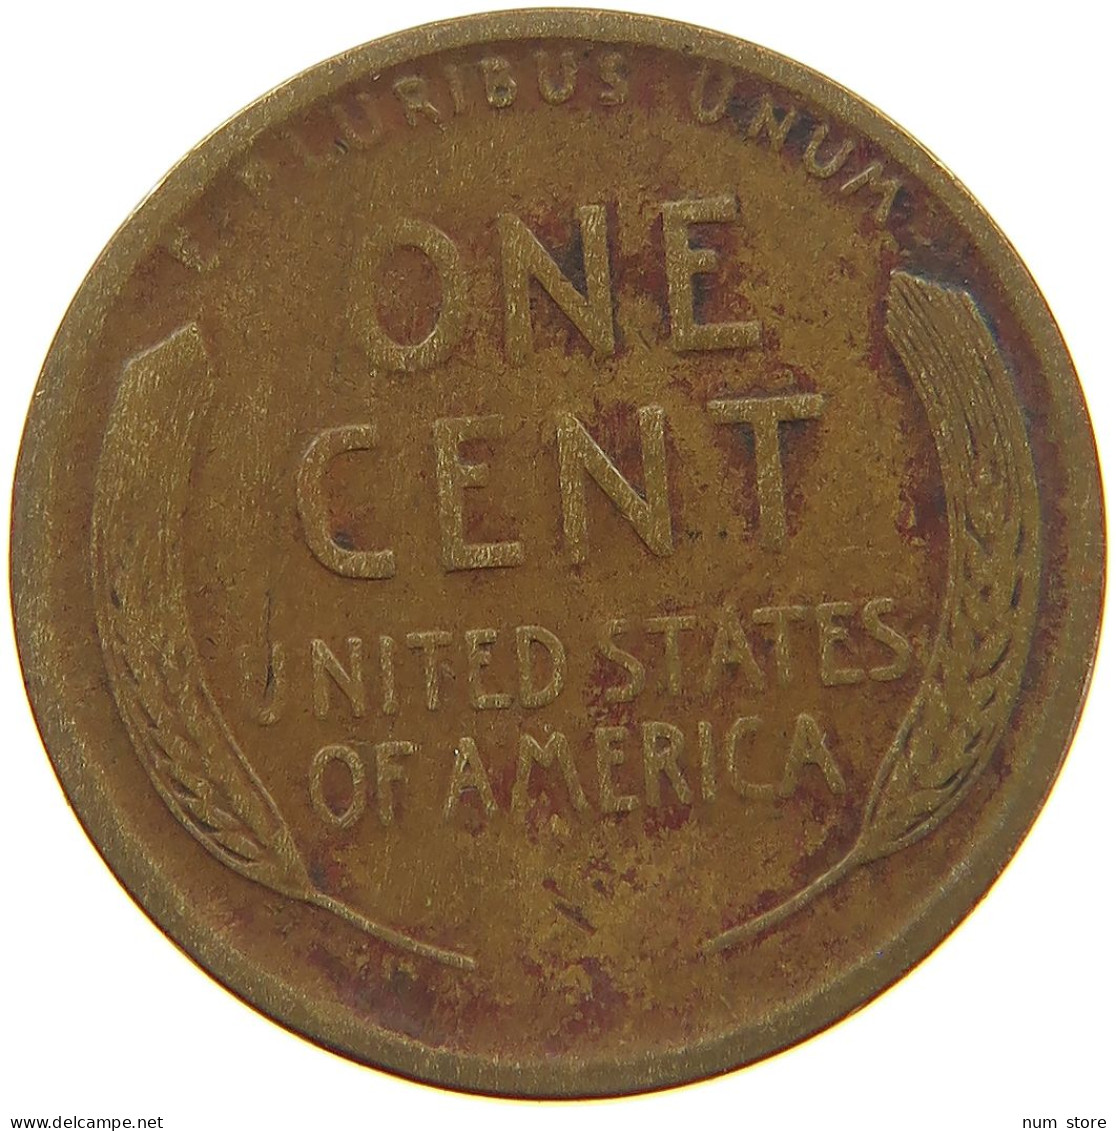 UNITED STATES OF AMERICA CENT 1921 S Lincoln Wheat #t001 0187 - 1909-1958: Lincoln, Wheat Ears Reverse